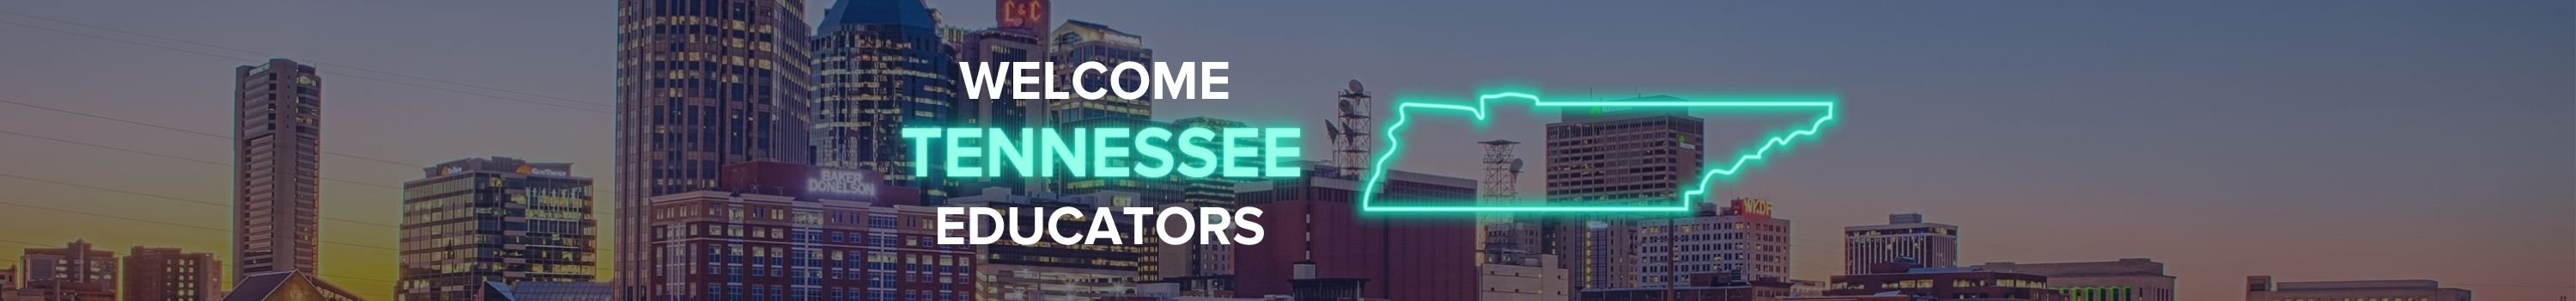 Welcome Tennessee Educators